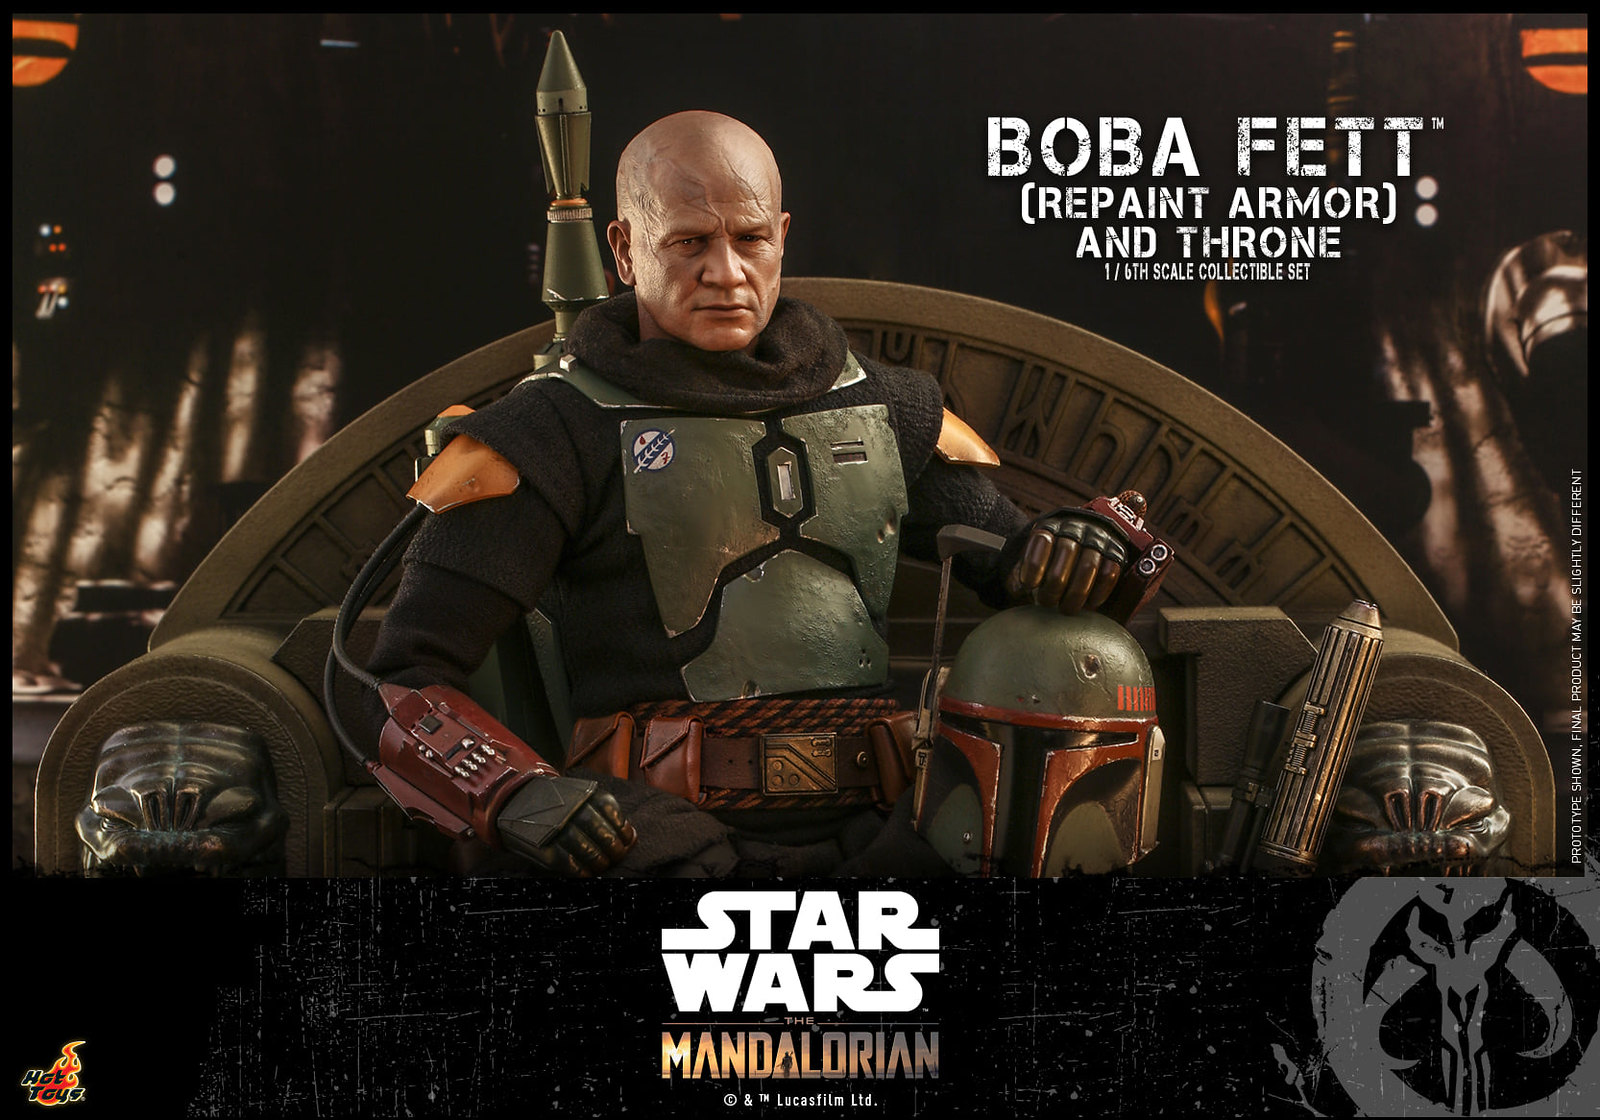 Star Wars: The Mandalorian™ - 1/6th scale Boba Fett™ (Repaint Armor) Collectible figure/ figure and Throne Collectible Set 51311497198_1ec0a9aa1b_h